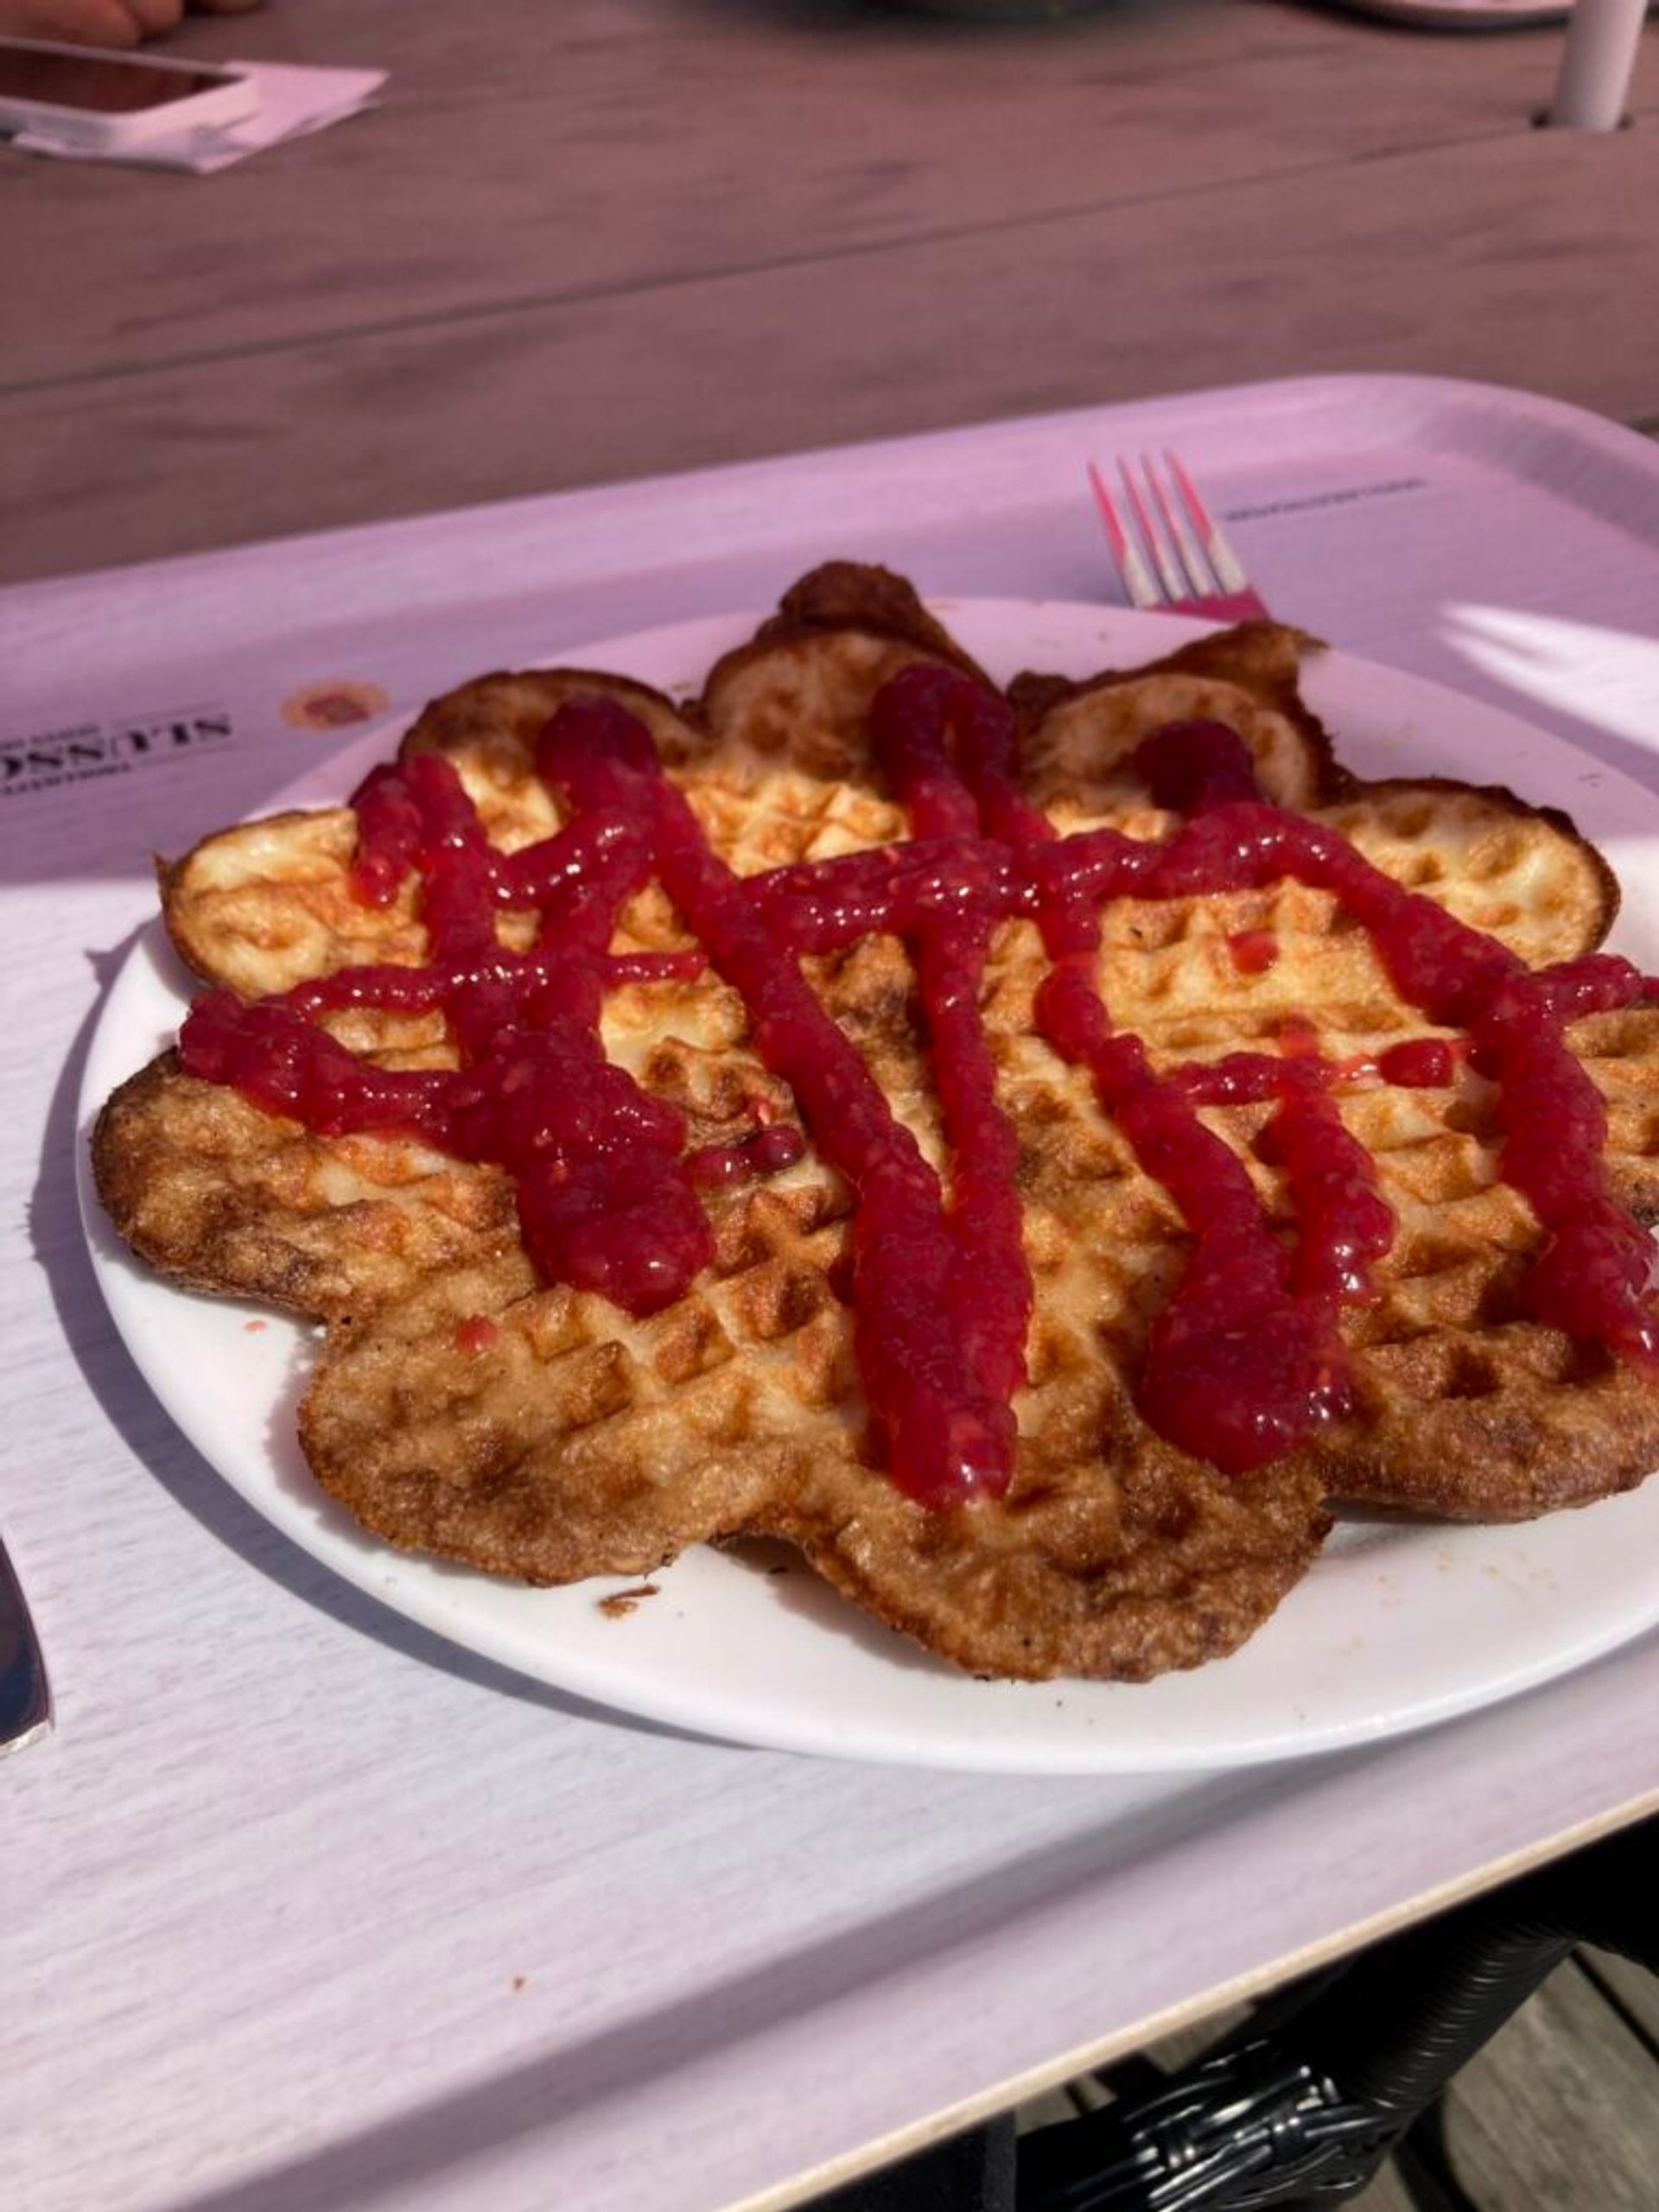 Waffles with jam